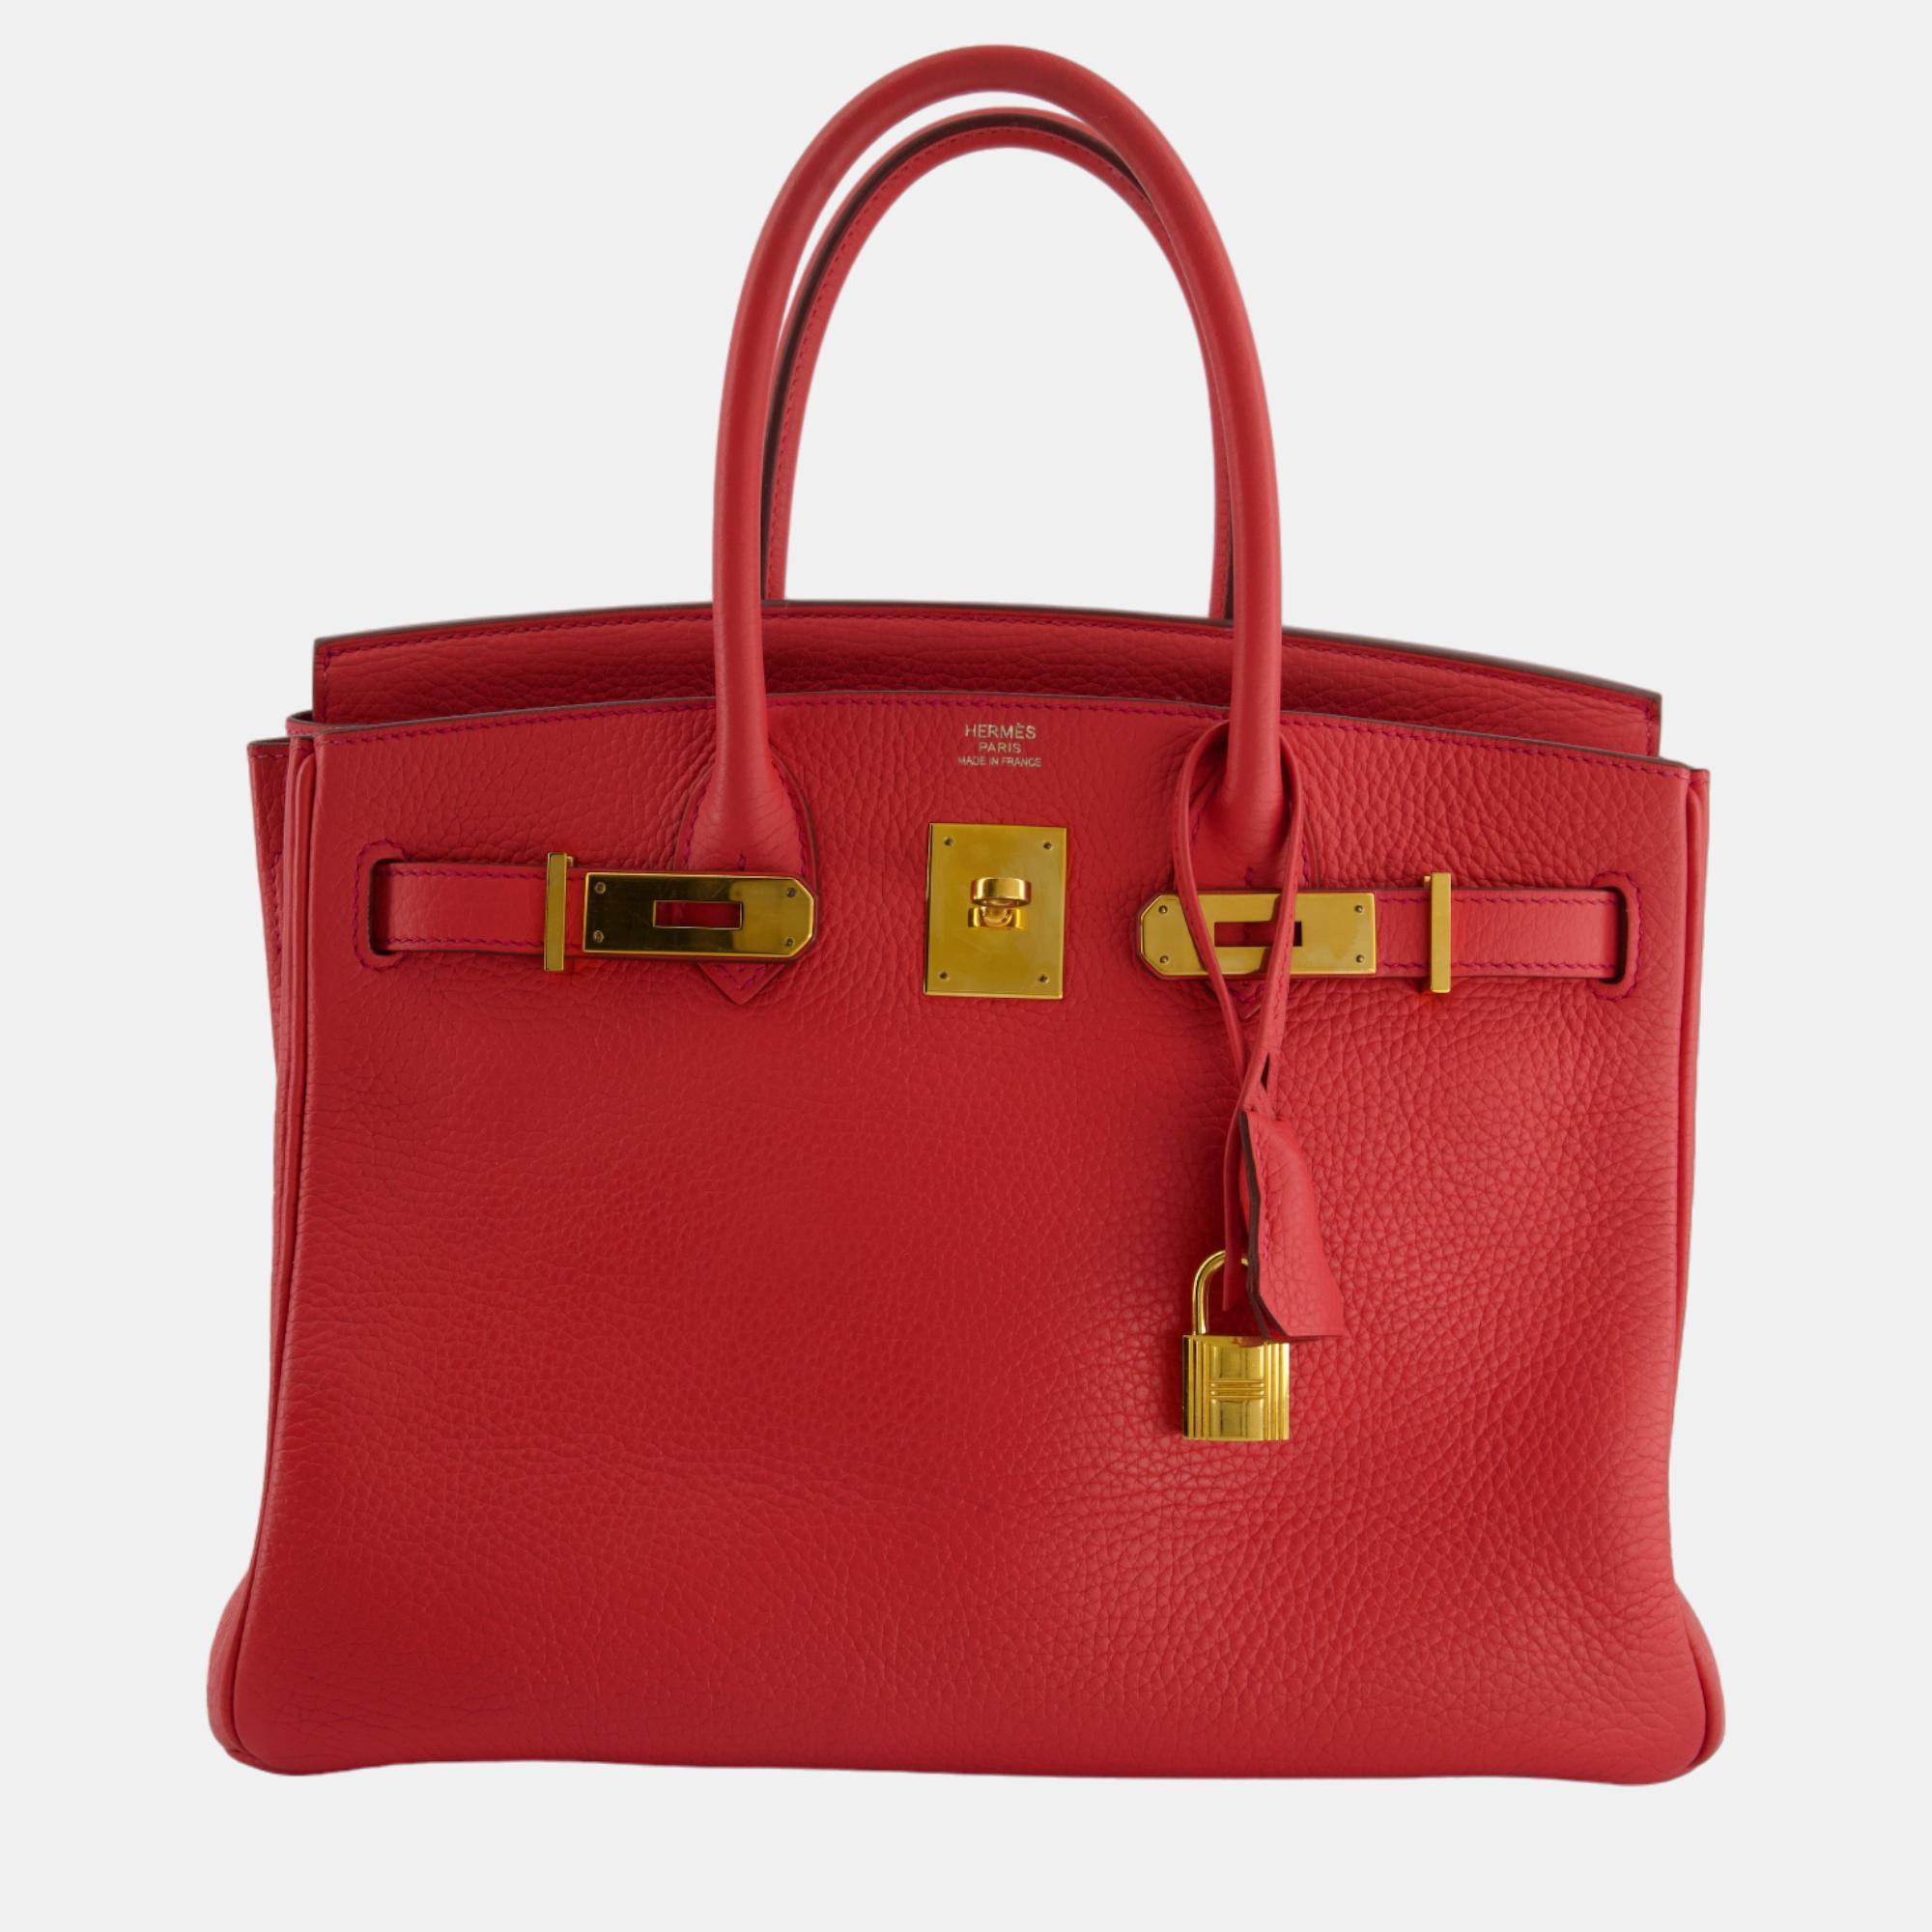 Hermes Birkin Bag 30cm Rouge Tomate In Togo Leather With Gold Hardware